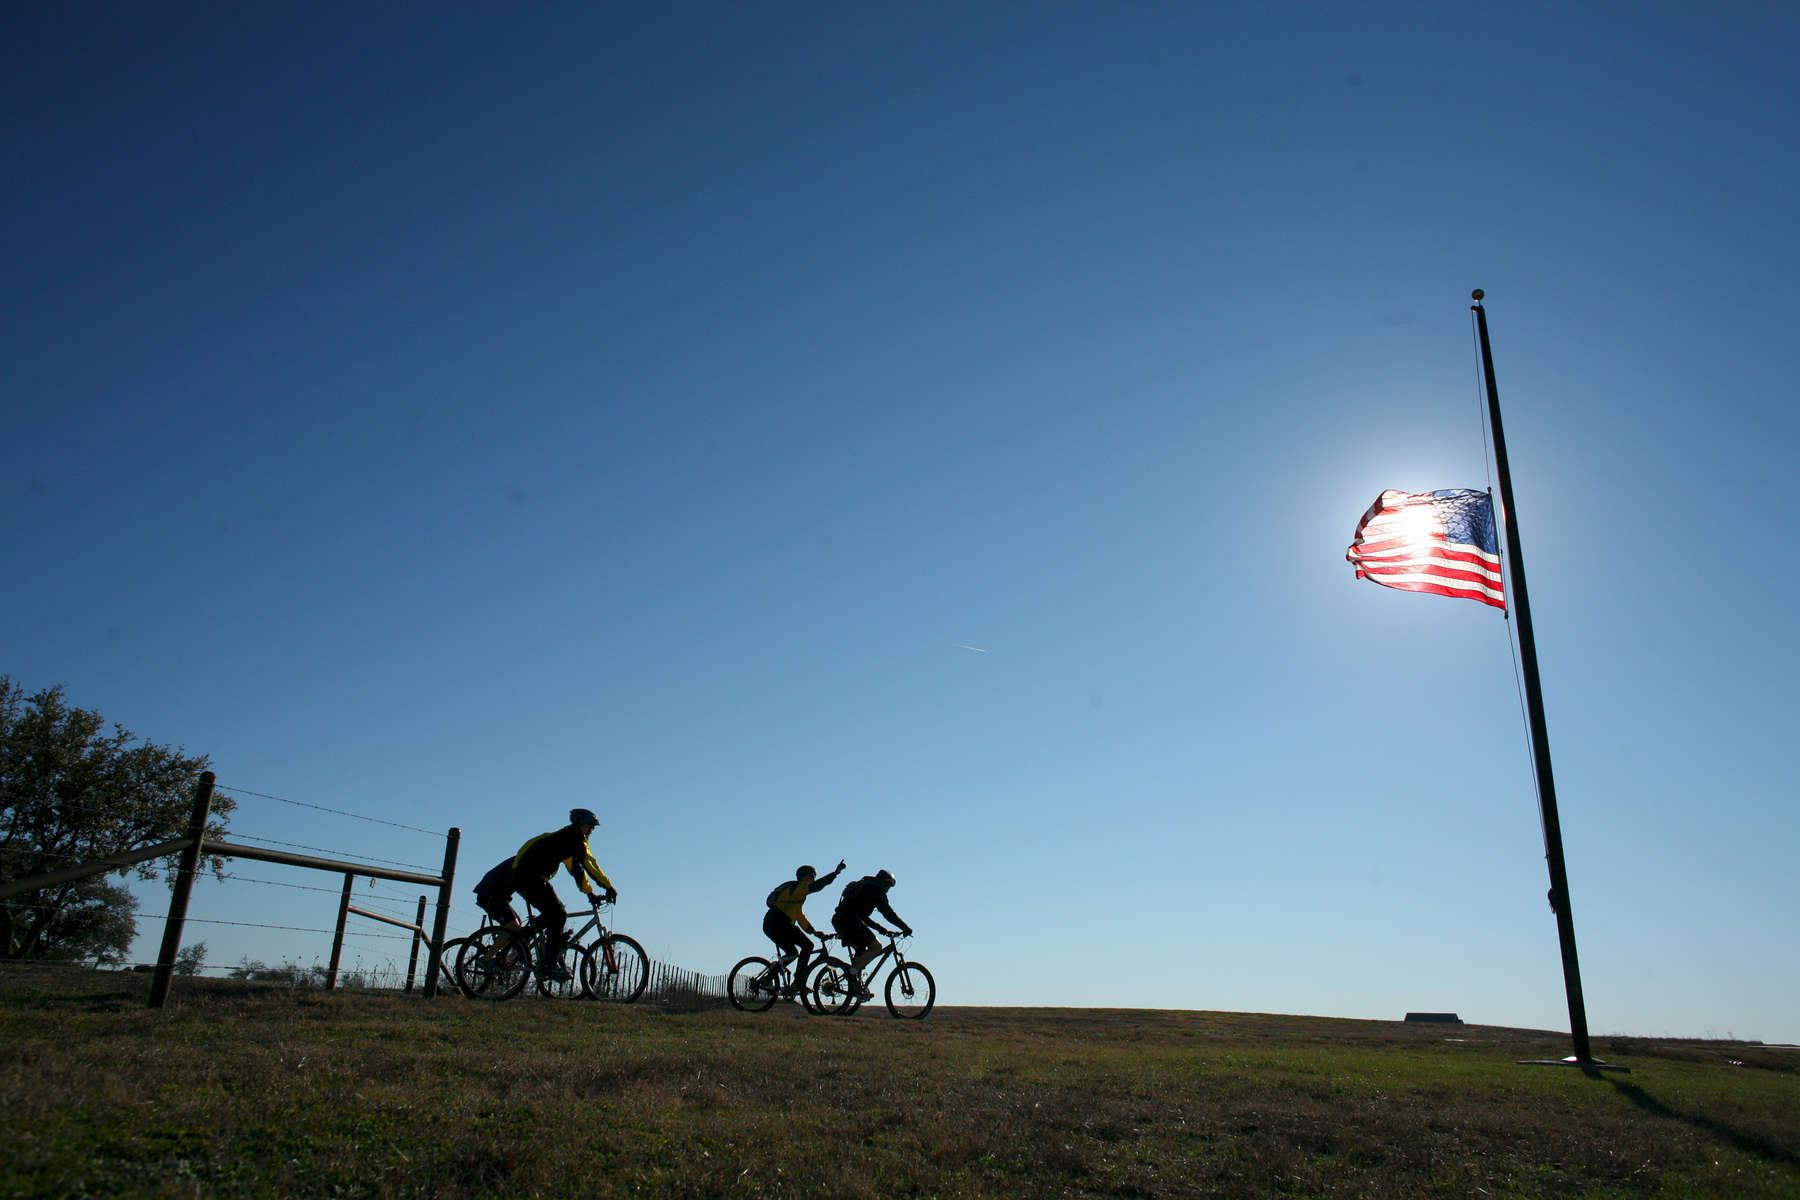 President Bush: Bike Riding with guests. Ranch, Crawford, Texas. American flag at half-staff on death of President Gerald R. Ford. Participants include: Mark McKinnon, Craig Savage and Kia Baskerville. POW